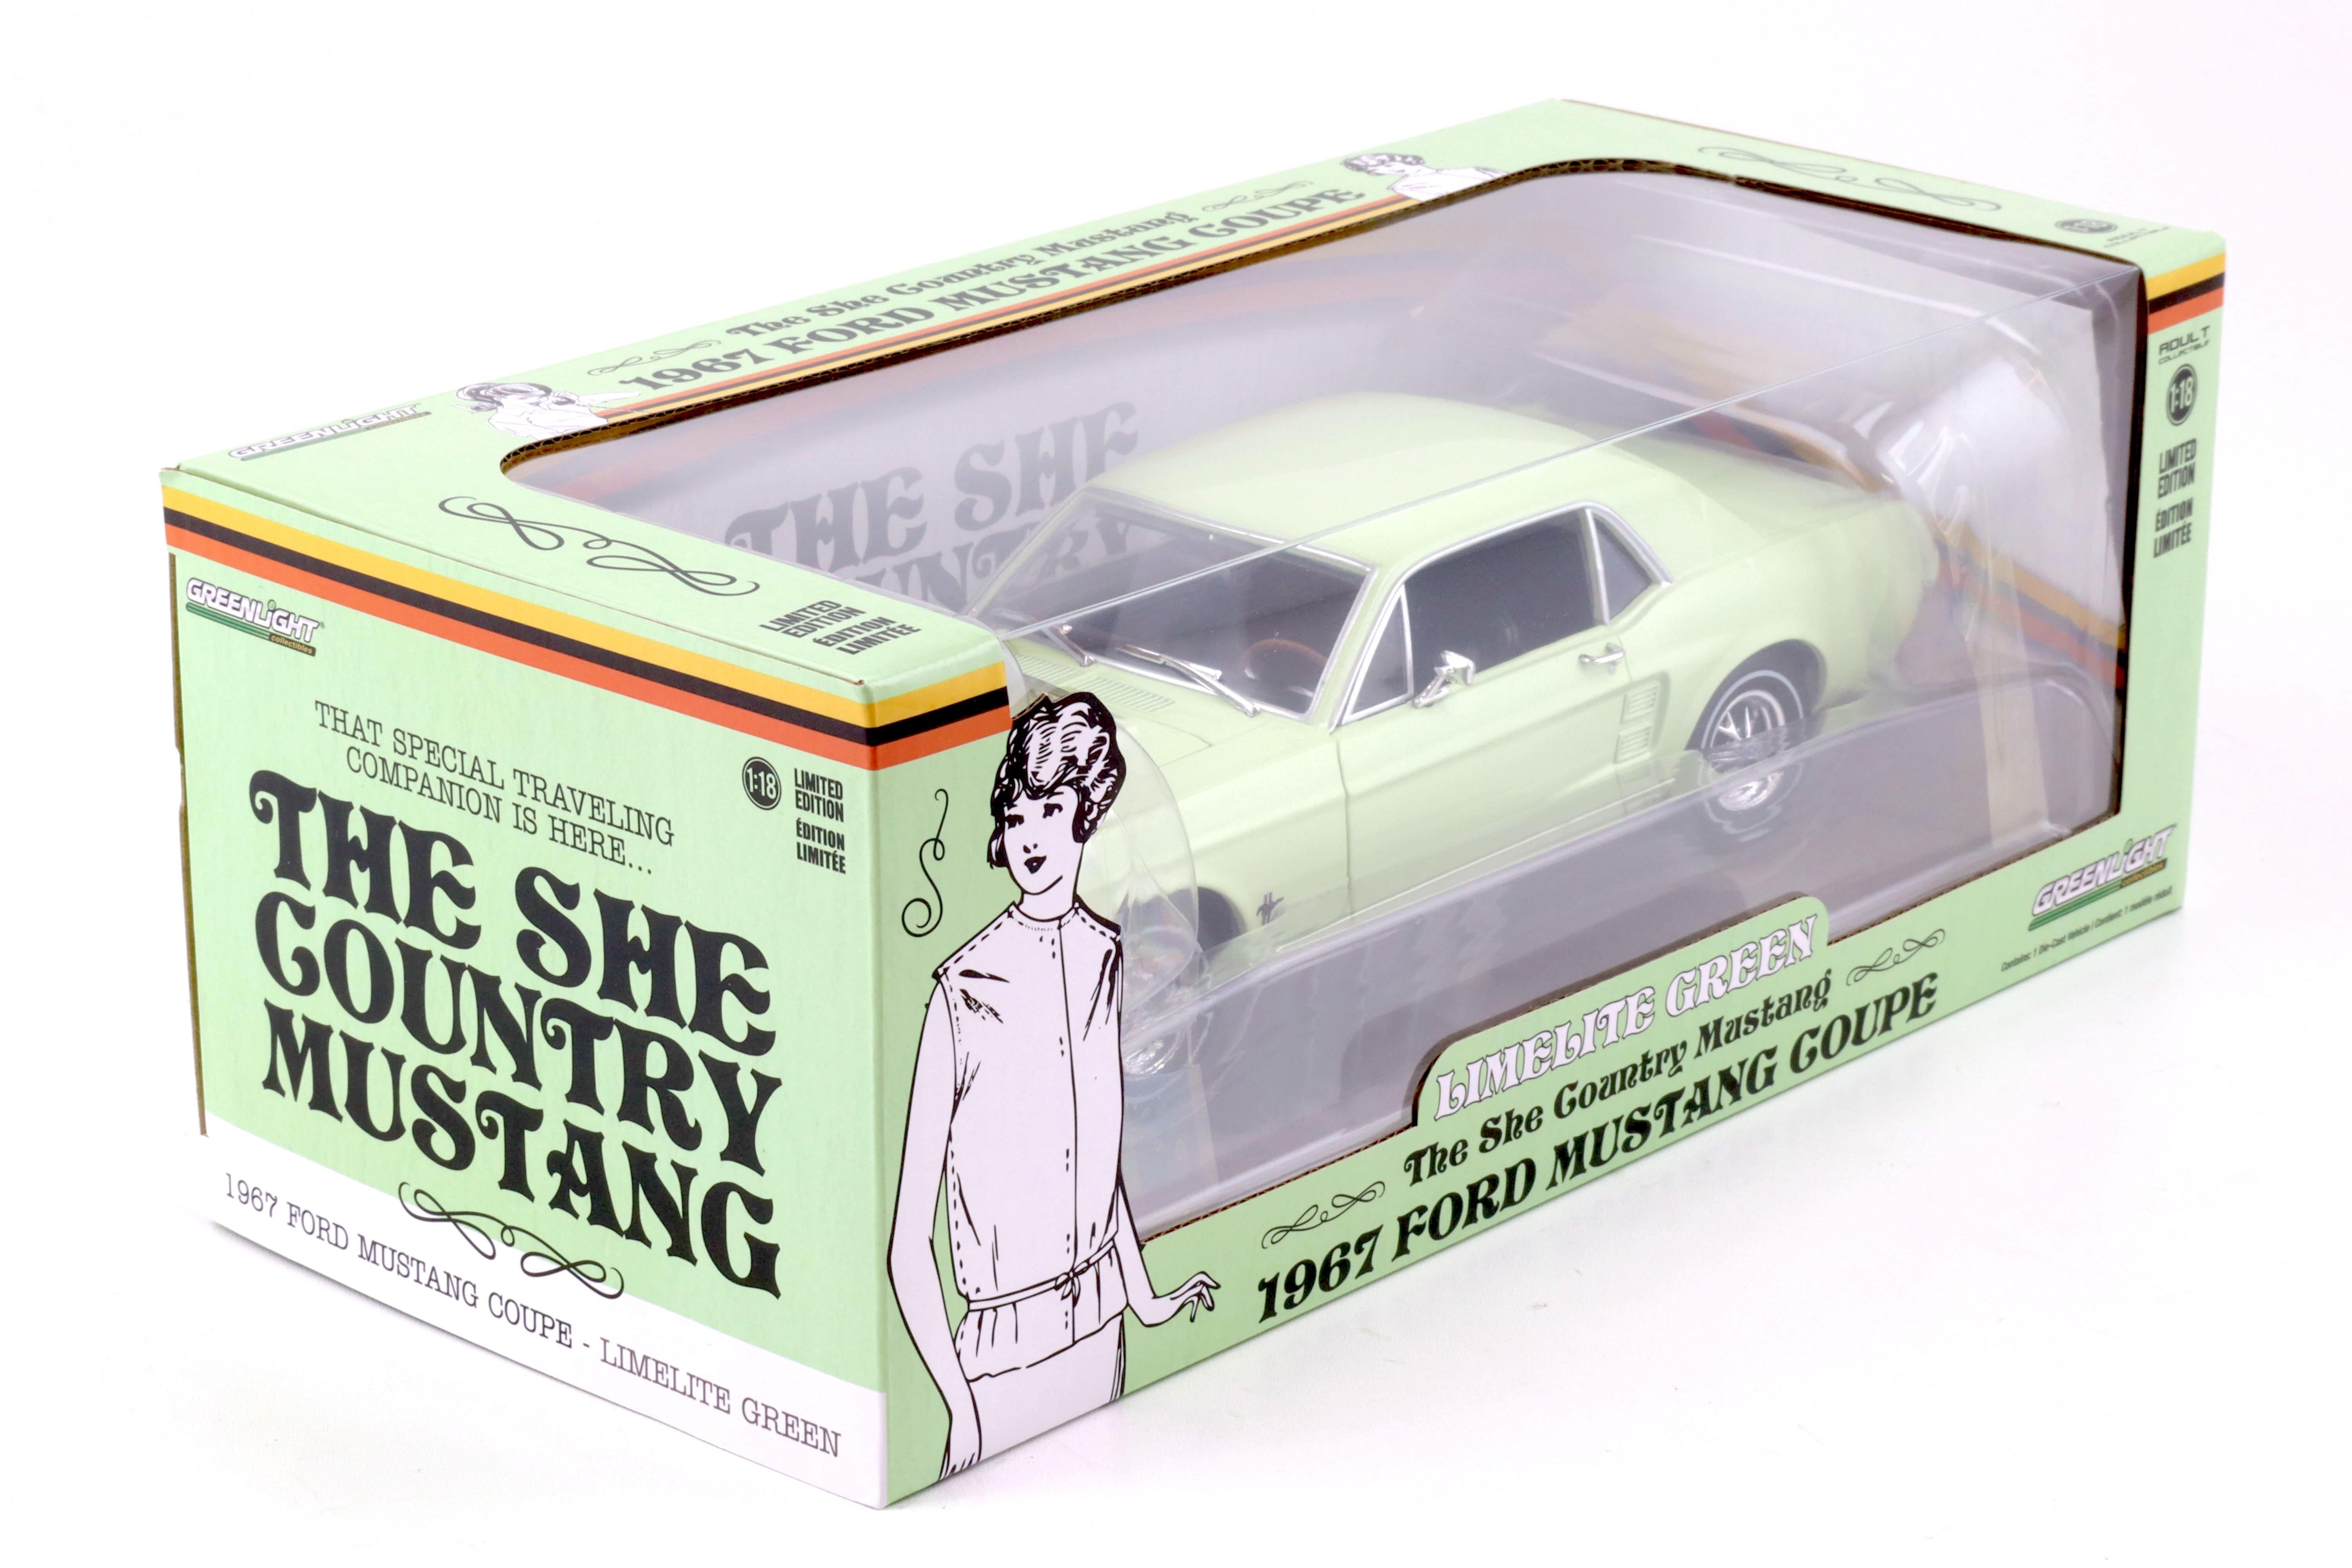 1:18 Greenlight 1967 Ford Mustang Coupe The She Country Mustang Limelite green